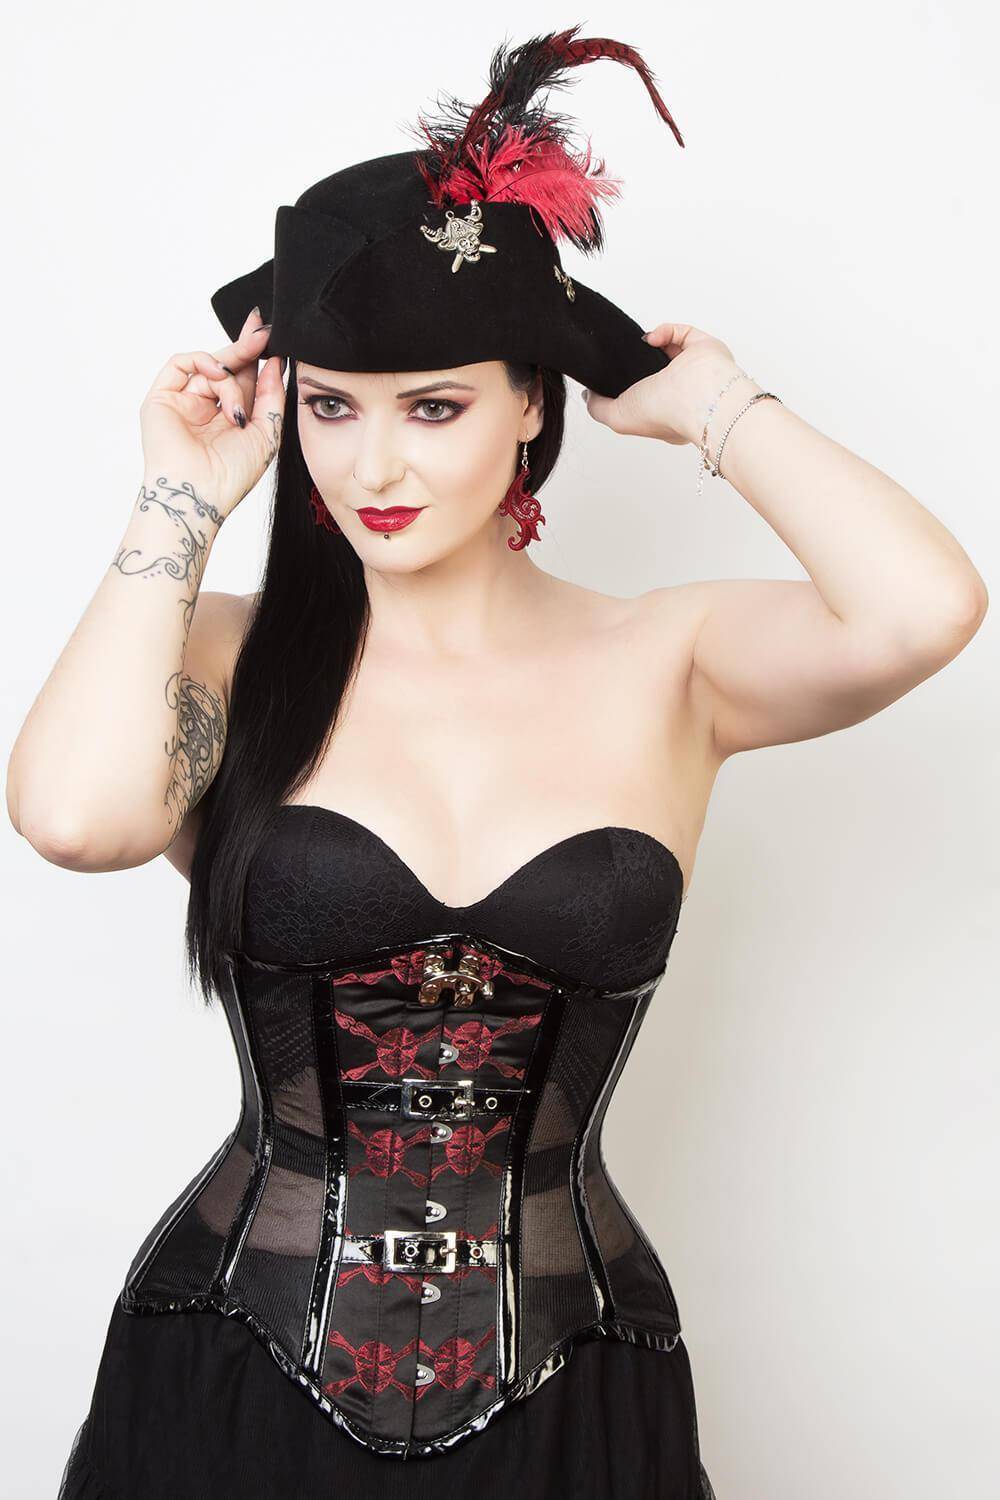 Selecting the Ideal Material, Color, and More for Top Stealth Corsets